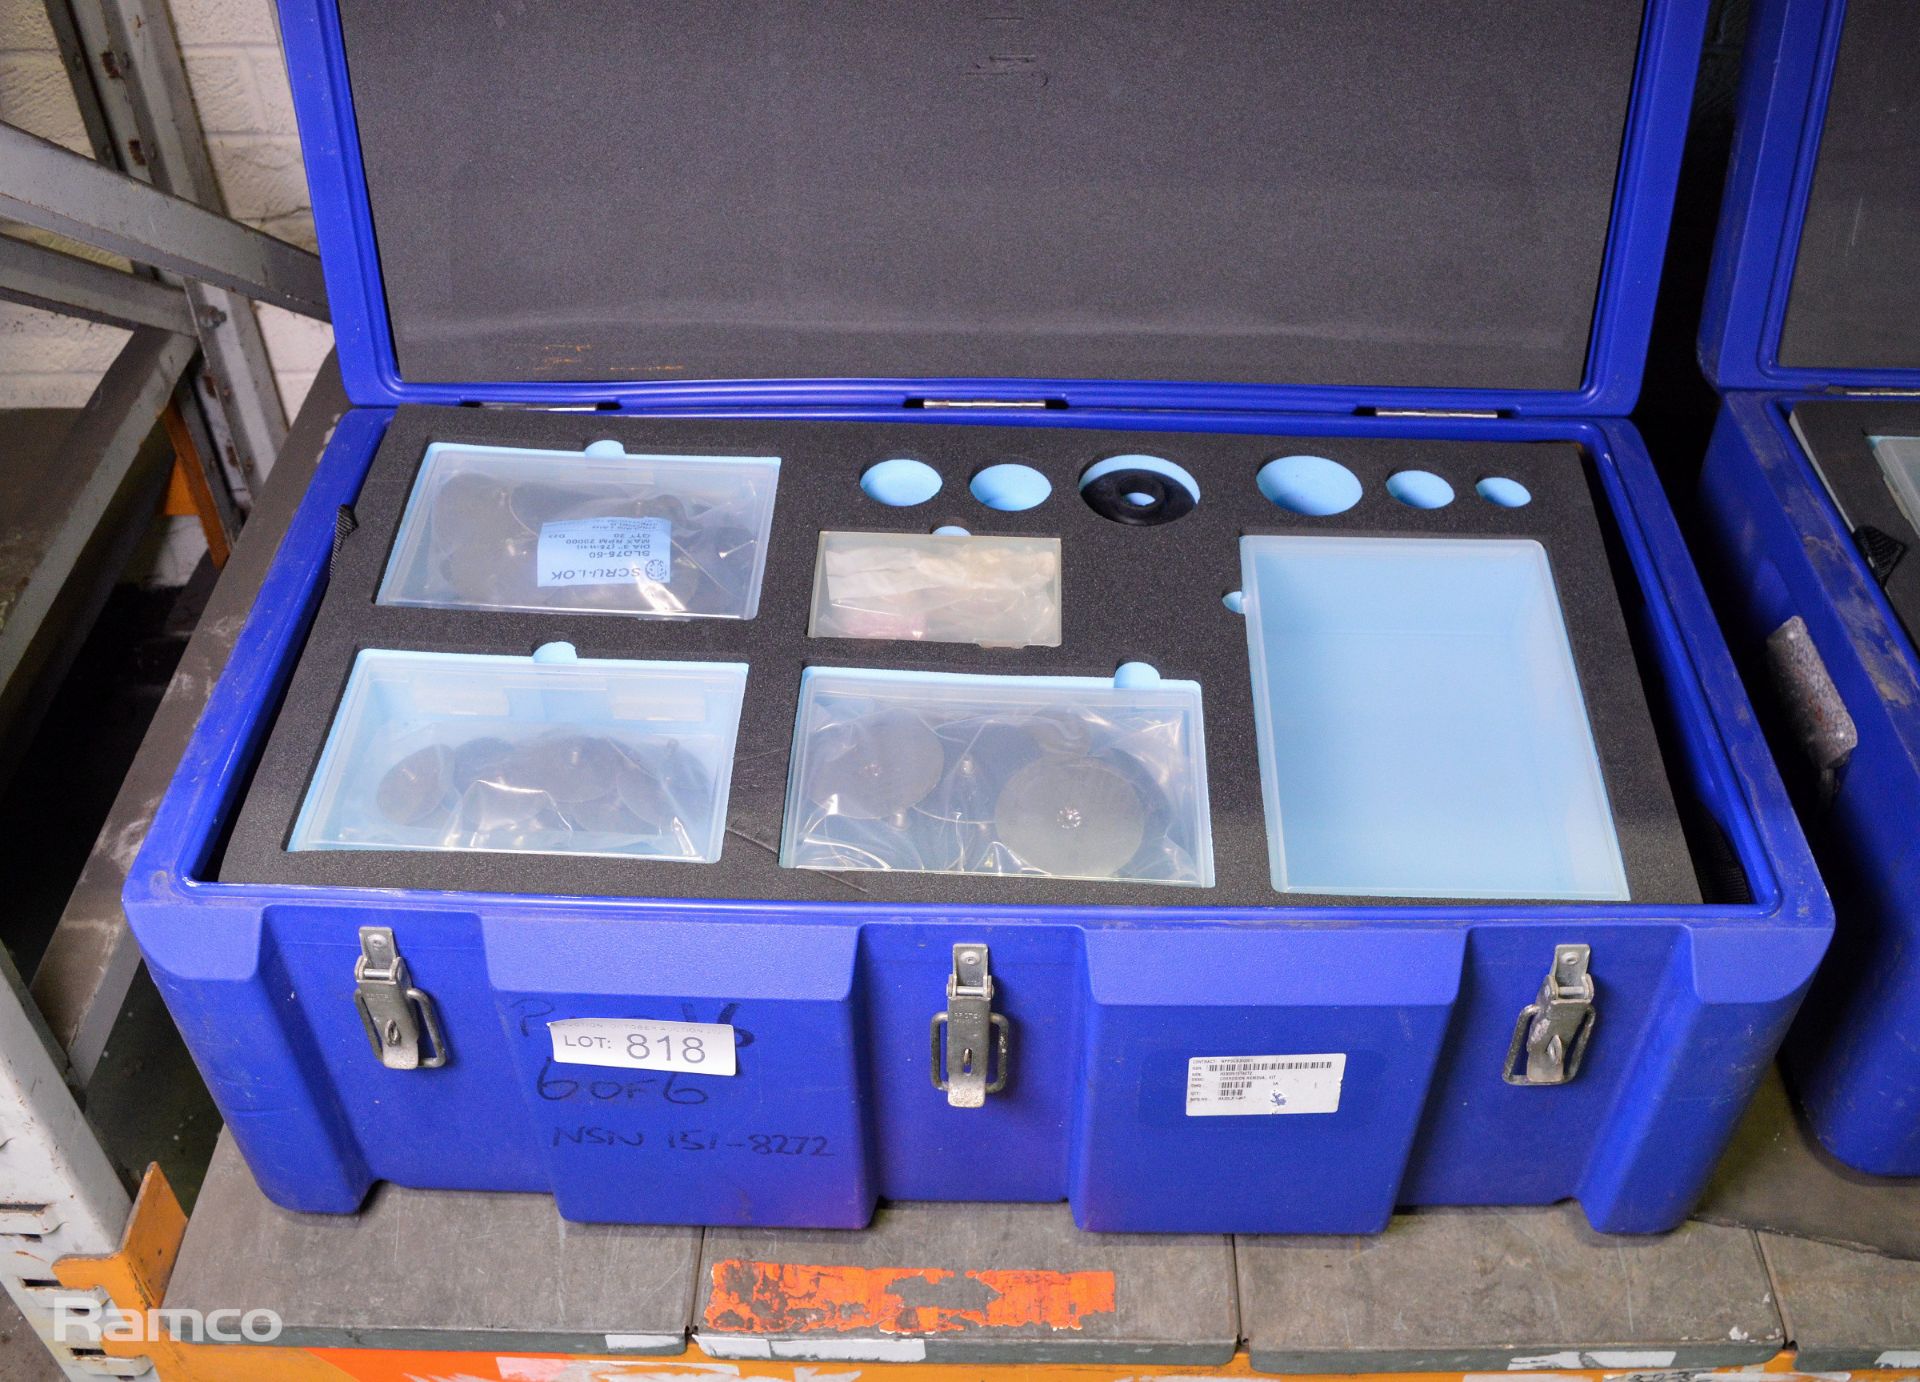 Corrosion removal kit in carry case - Image 2 of 8